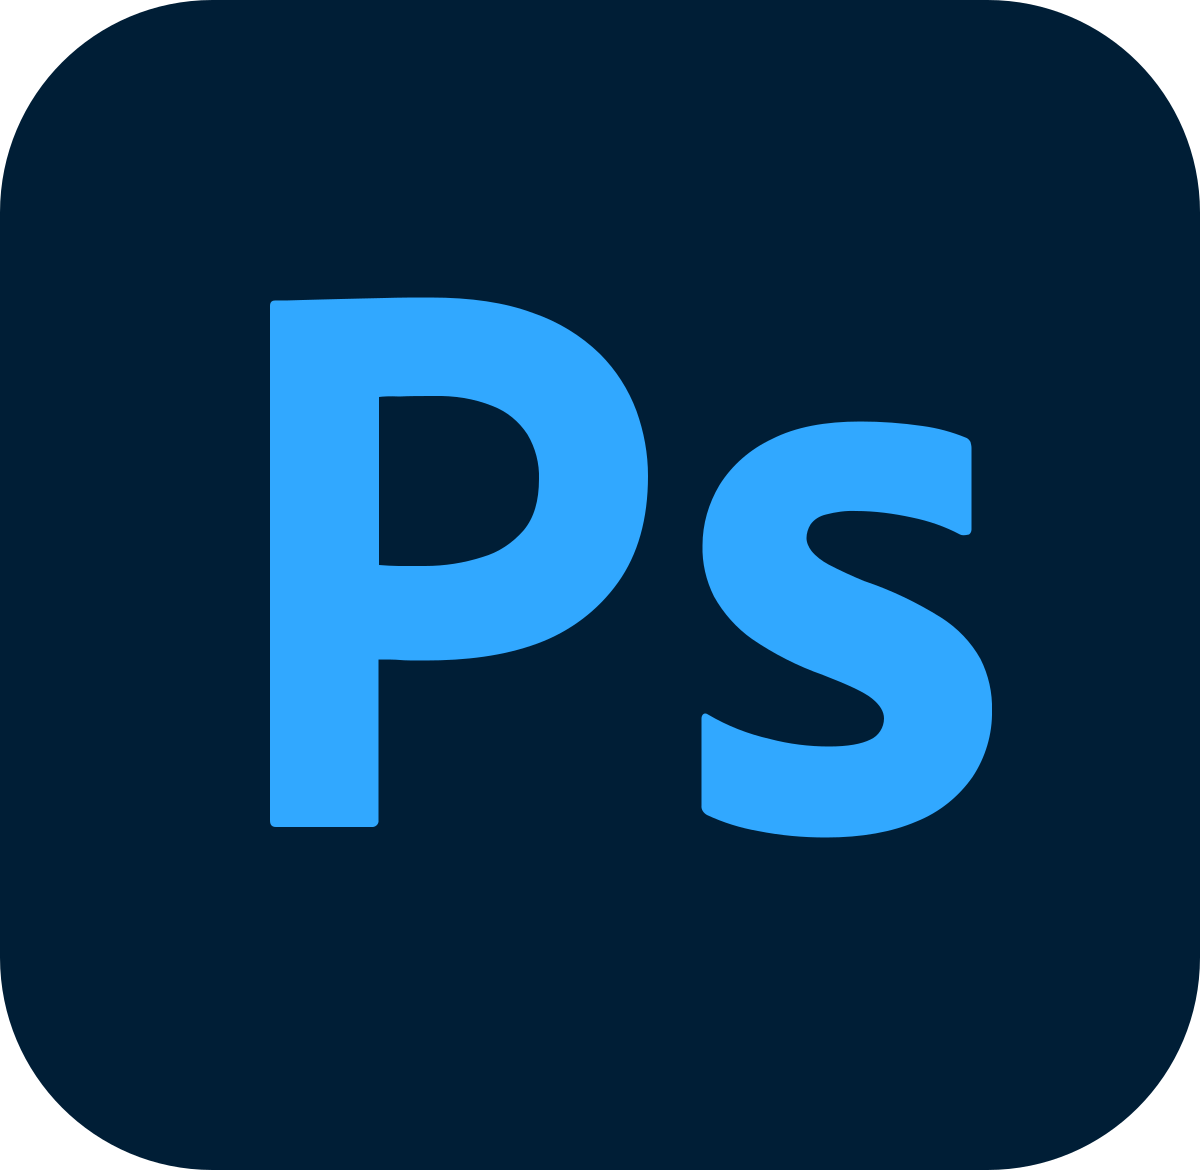 Photo editing software free for mac